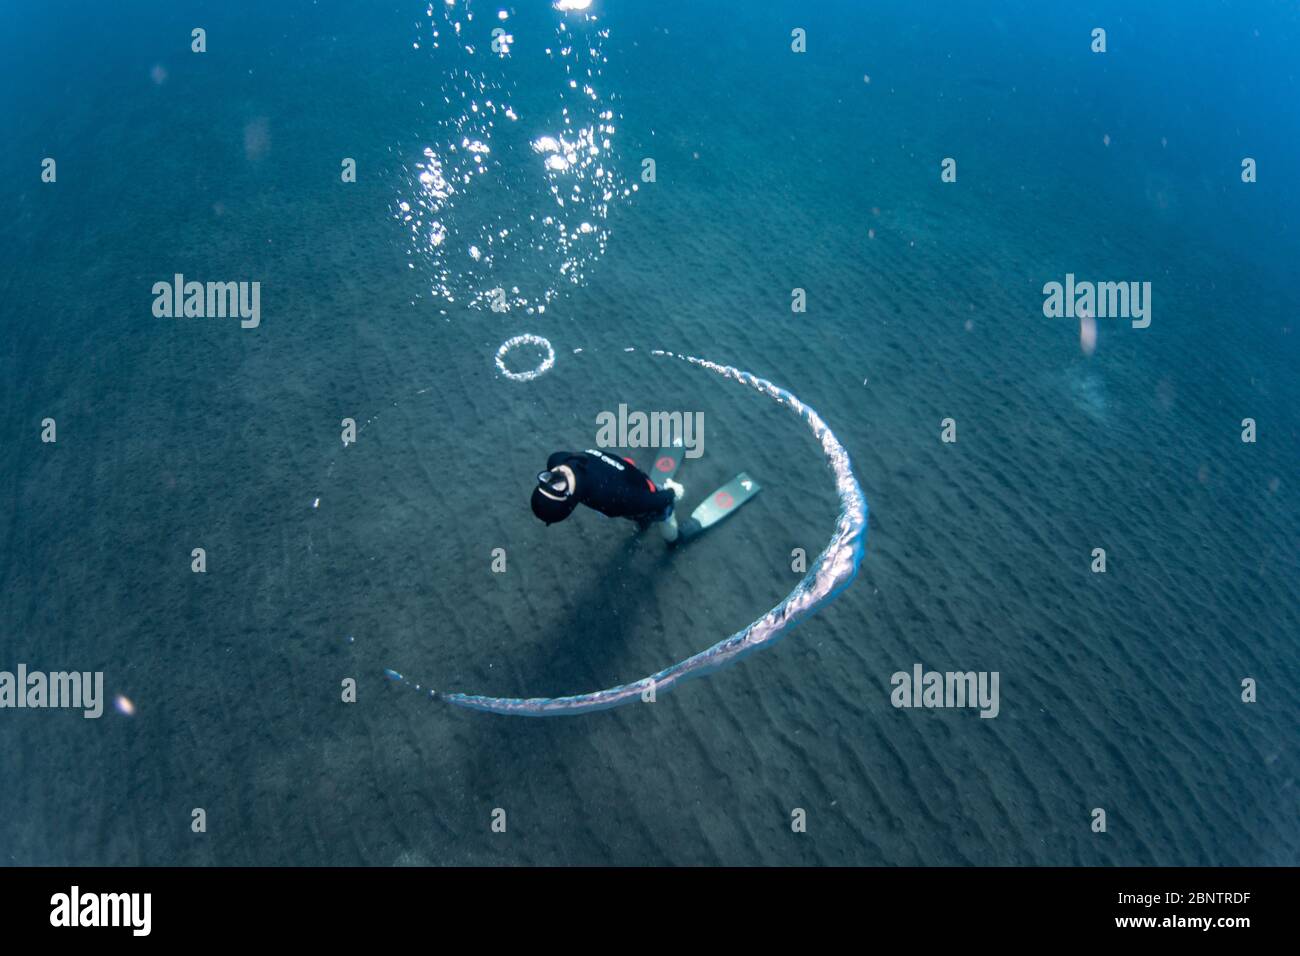 Freediver underwater blowing bubble rings in the shallow water of Tenerife, Canary Islands, Spain. Stock Photo